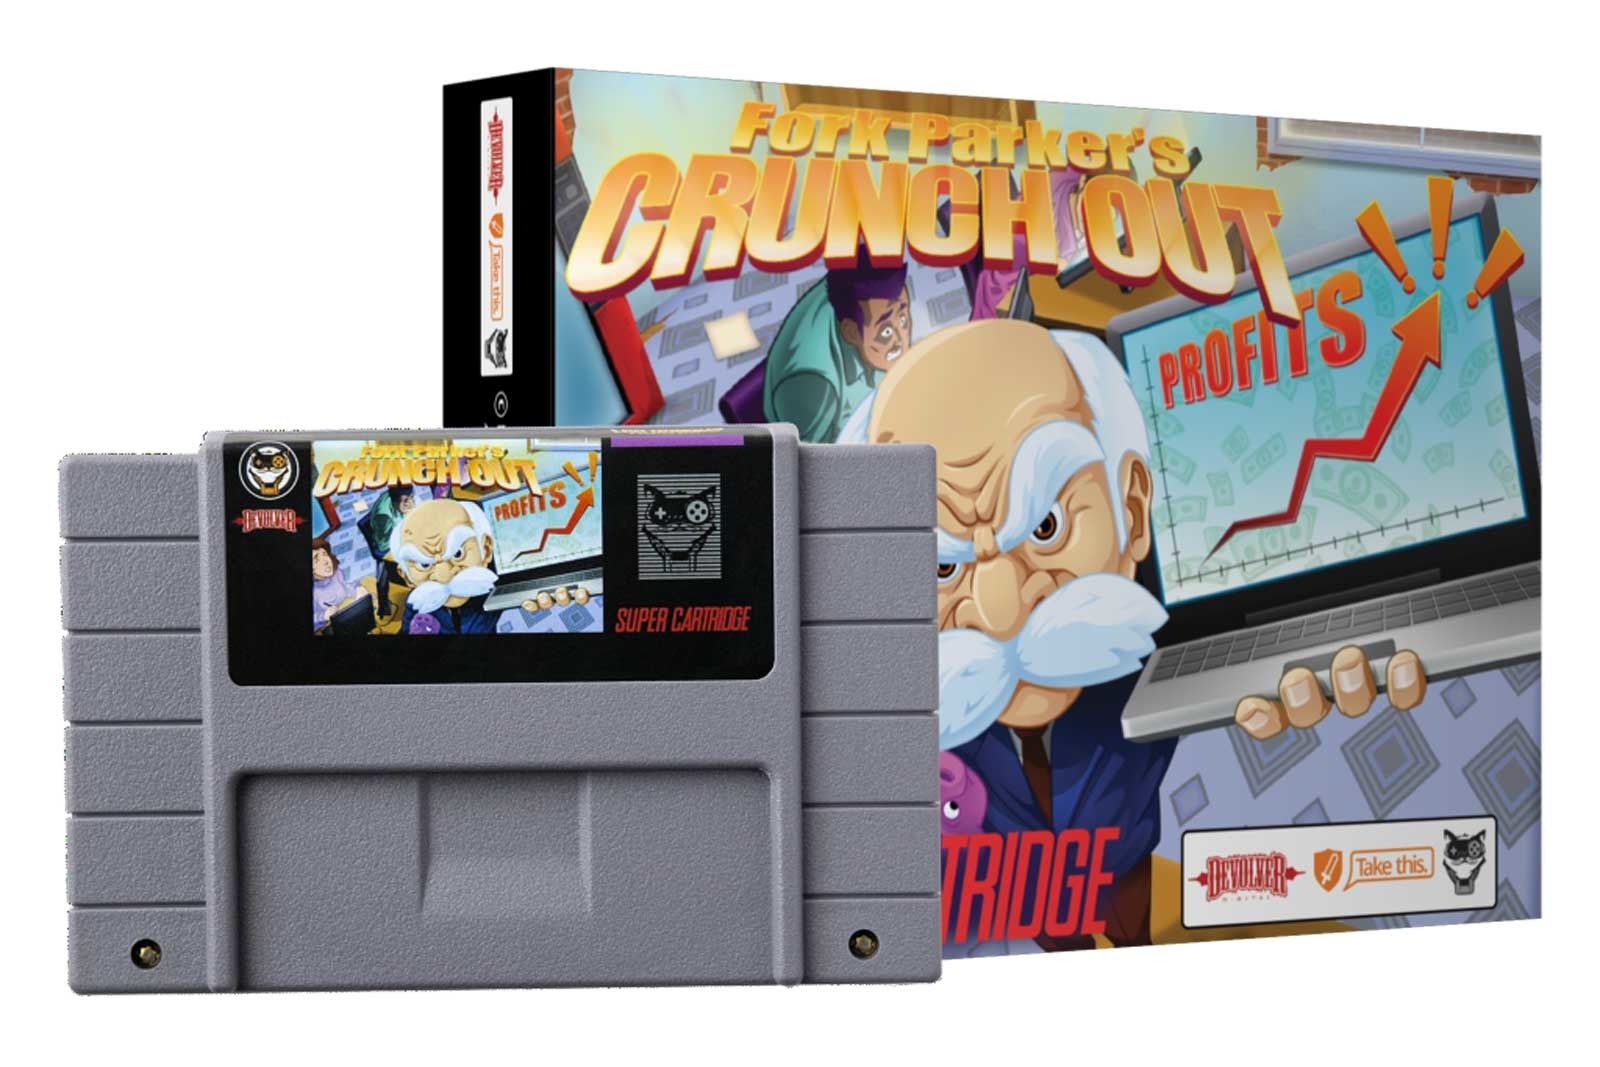 Devolver Digital is releasing a new game on the Super Nintendo